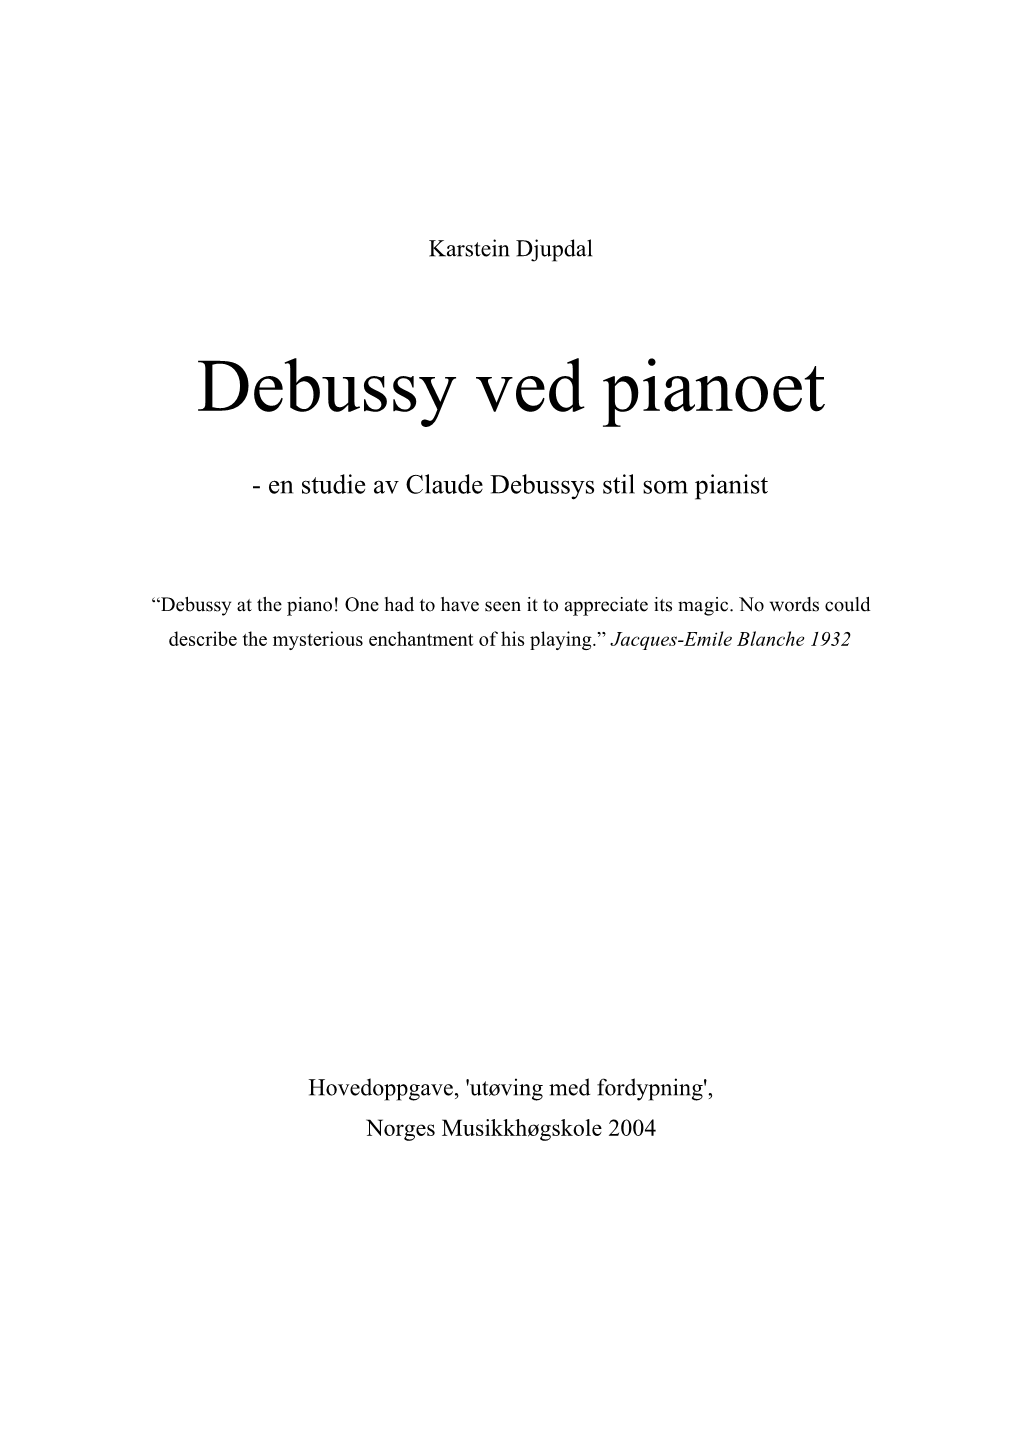 Debussy Ved Pianoet